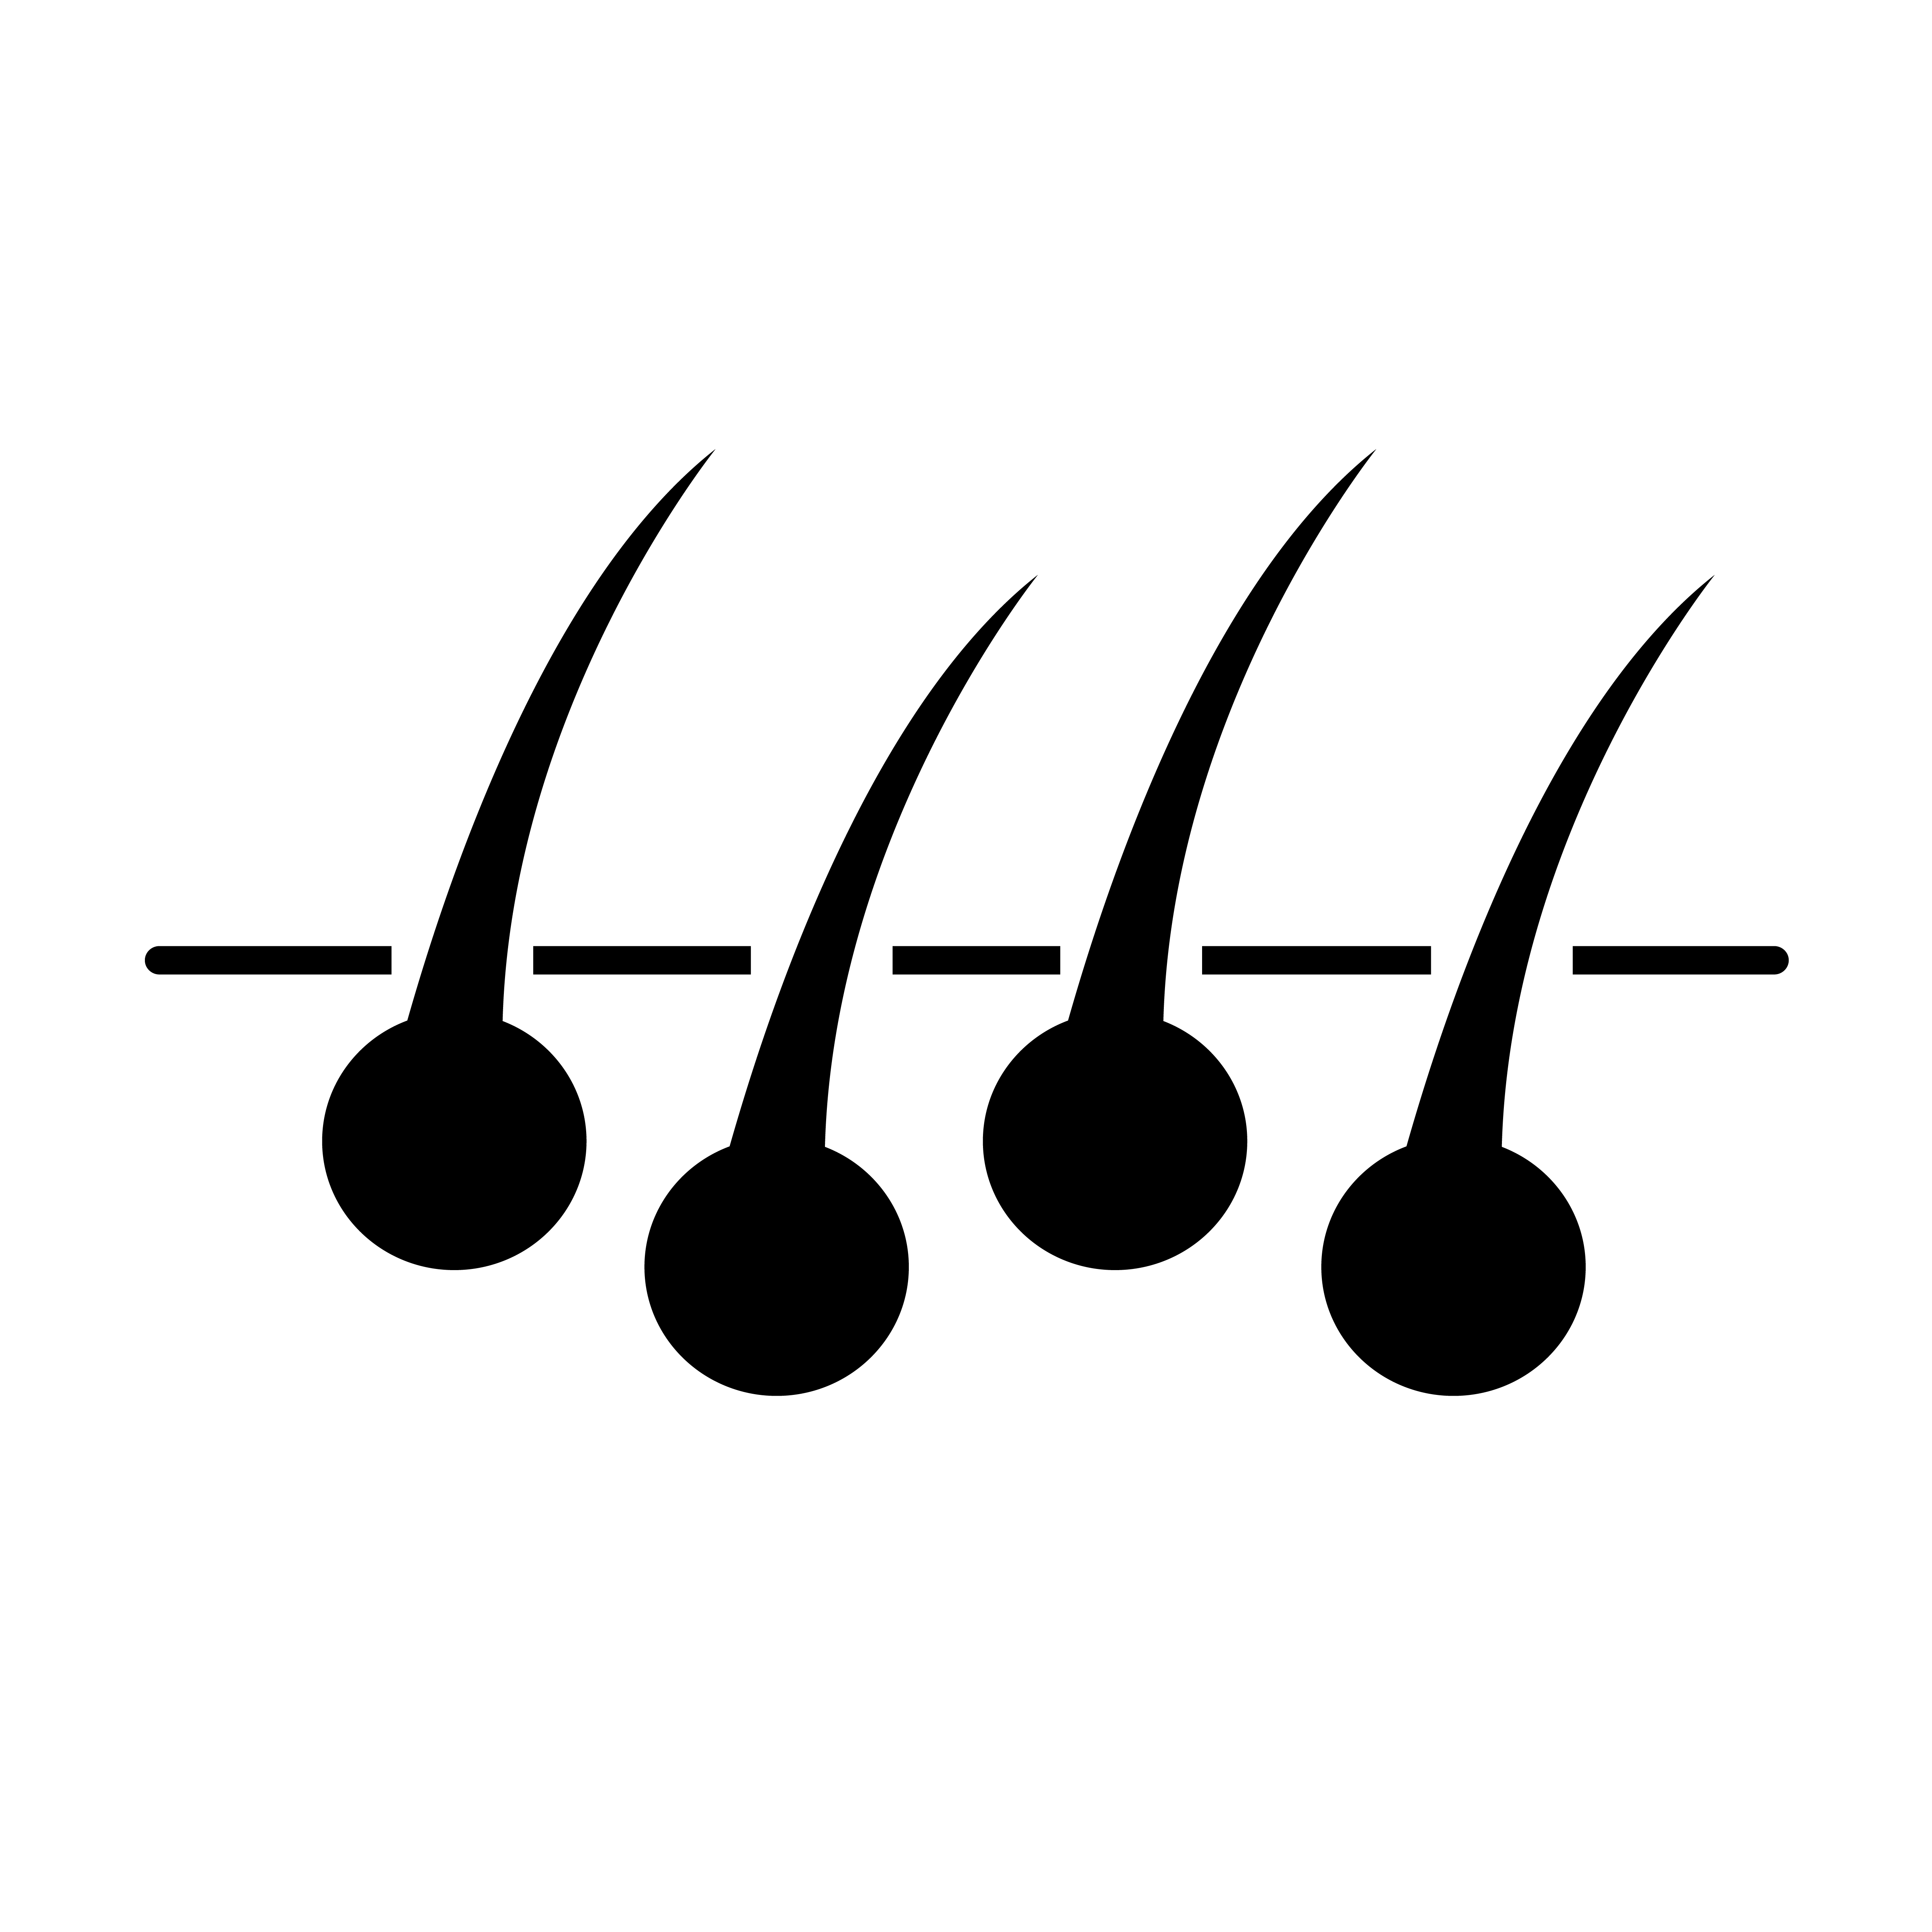 Sign of hair icon 569570 Download Free Vectors, Clipart